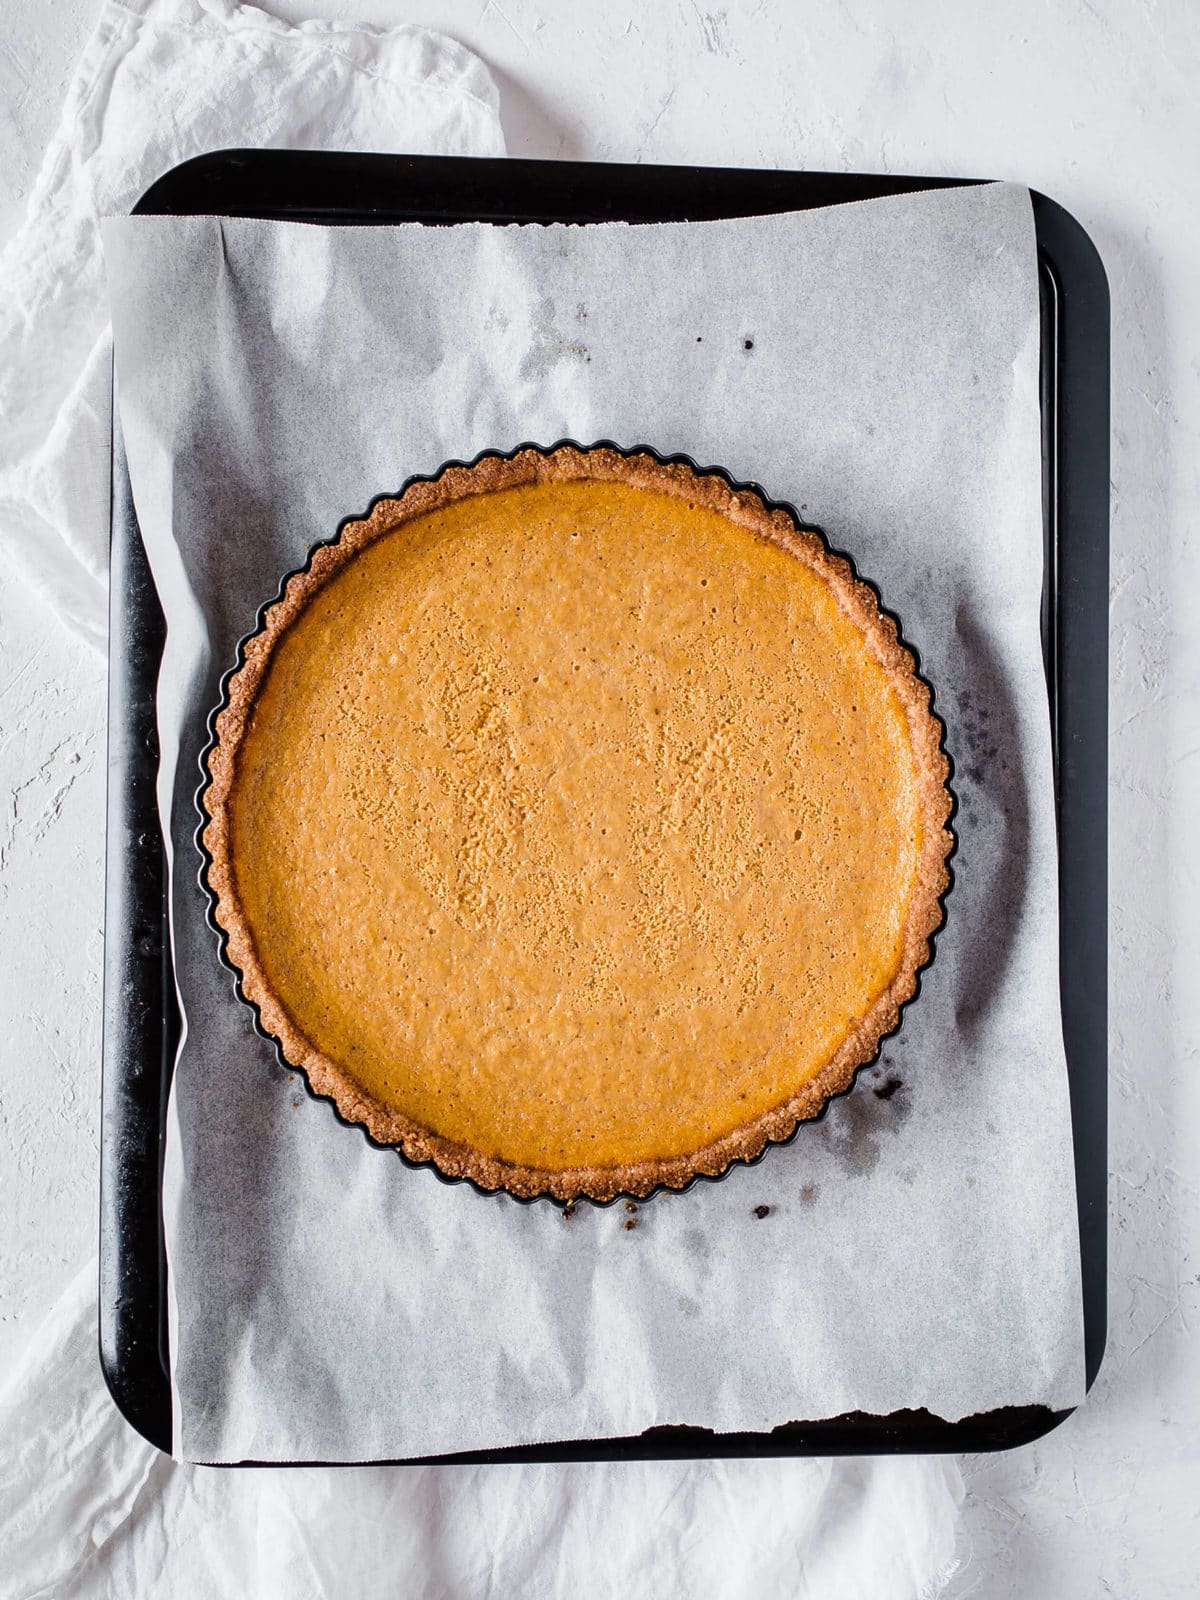 Keto pumpkin pie fresh out of the oven